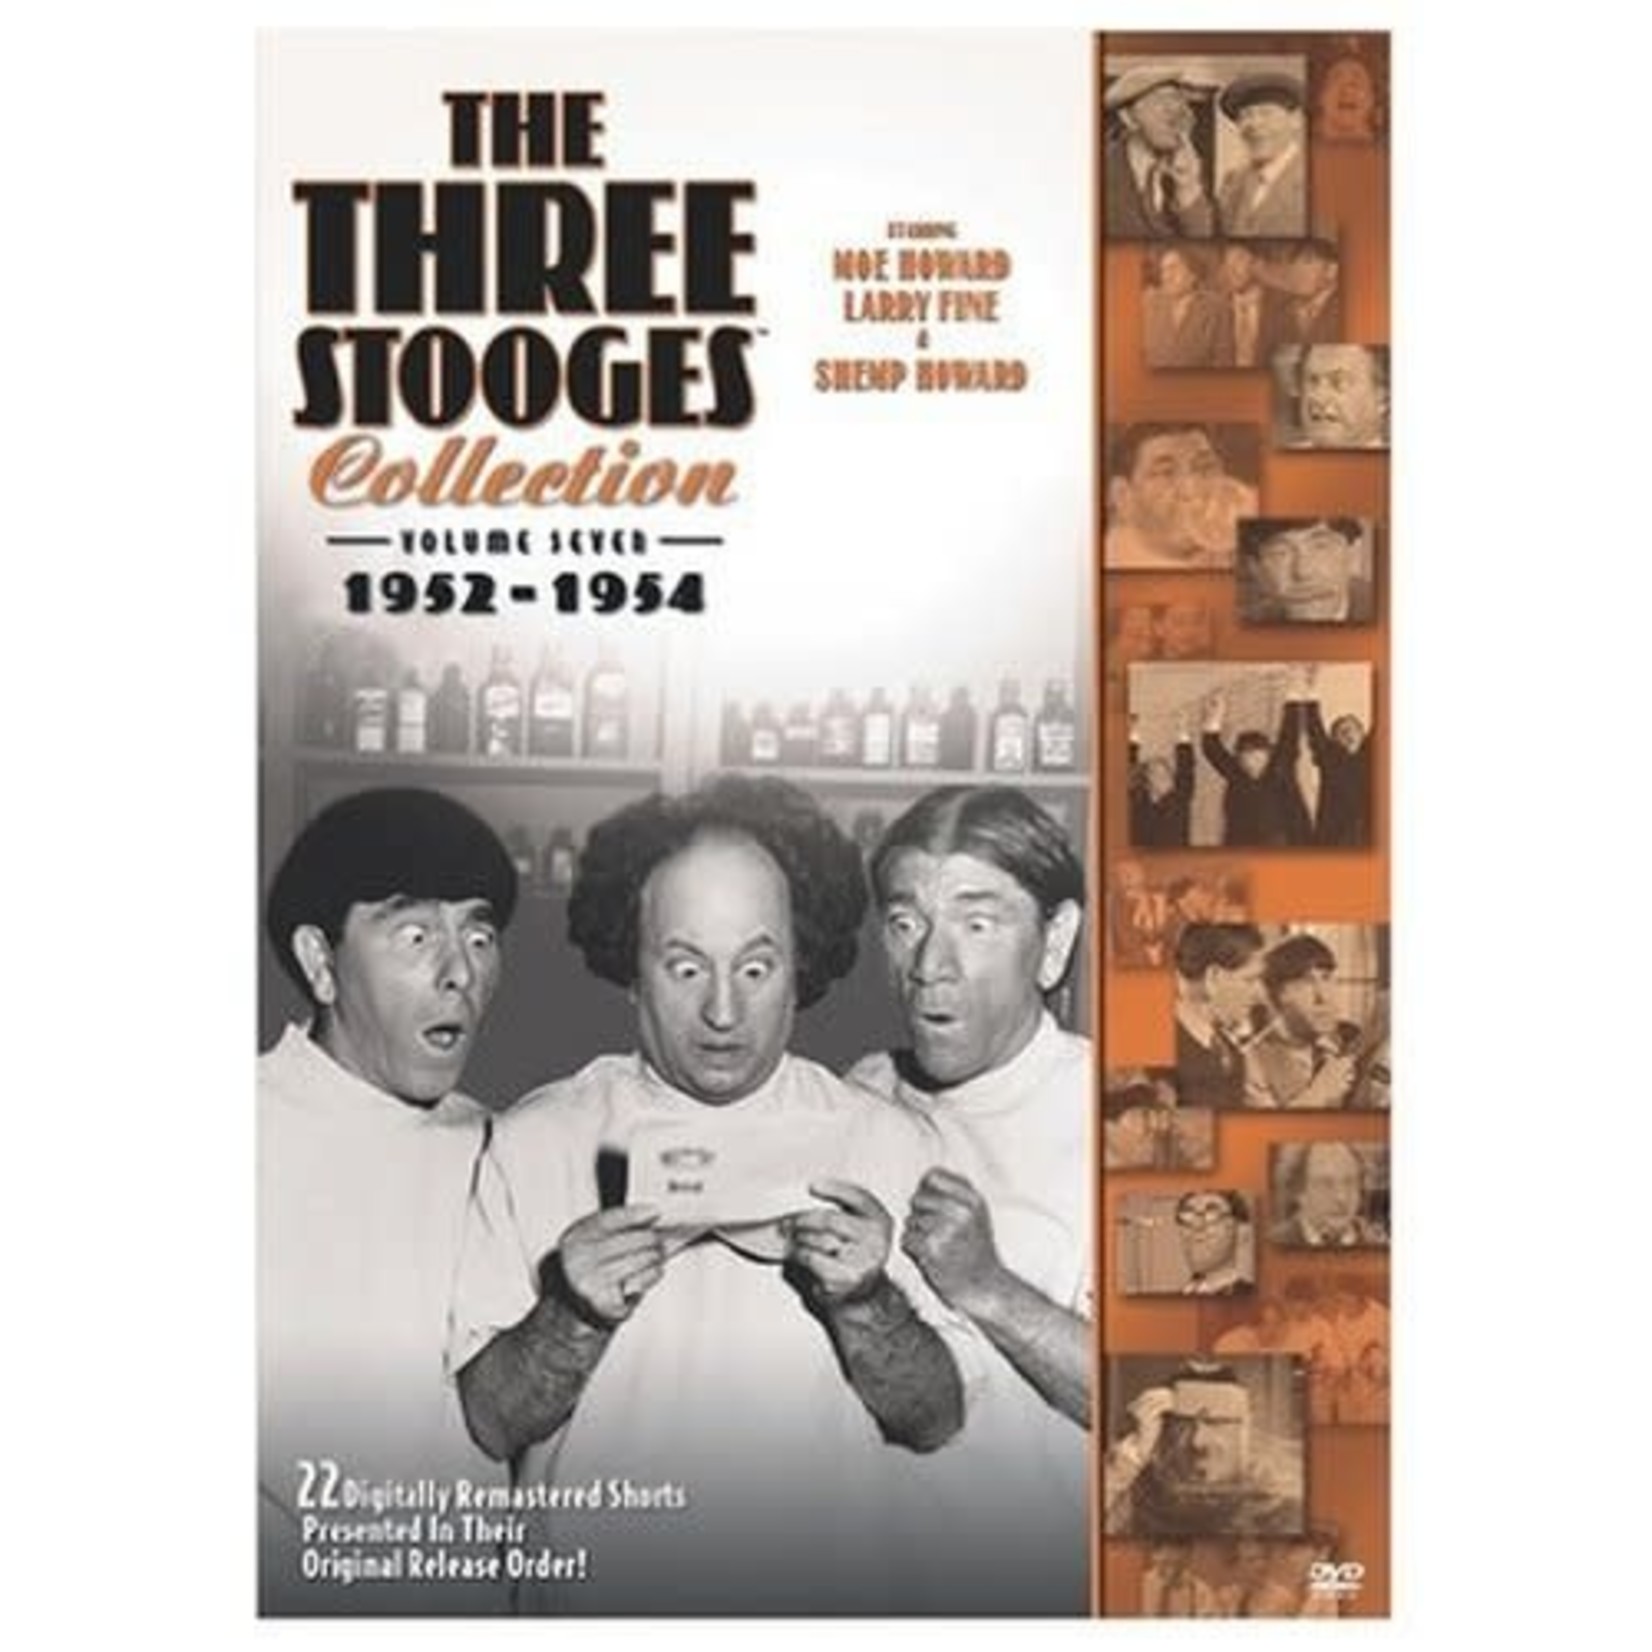 Three Stooges - Collection Vol. 7: 1952-1954 [USED DVD]